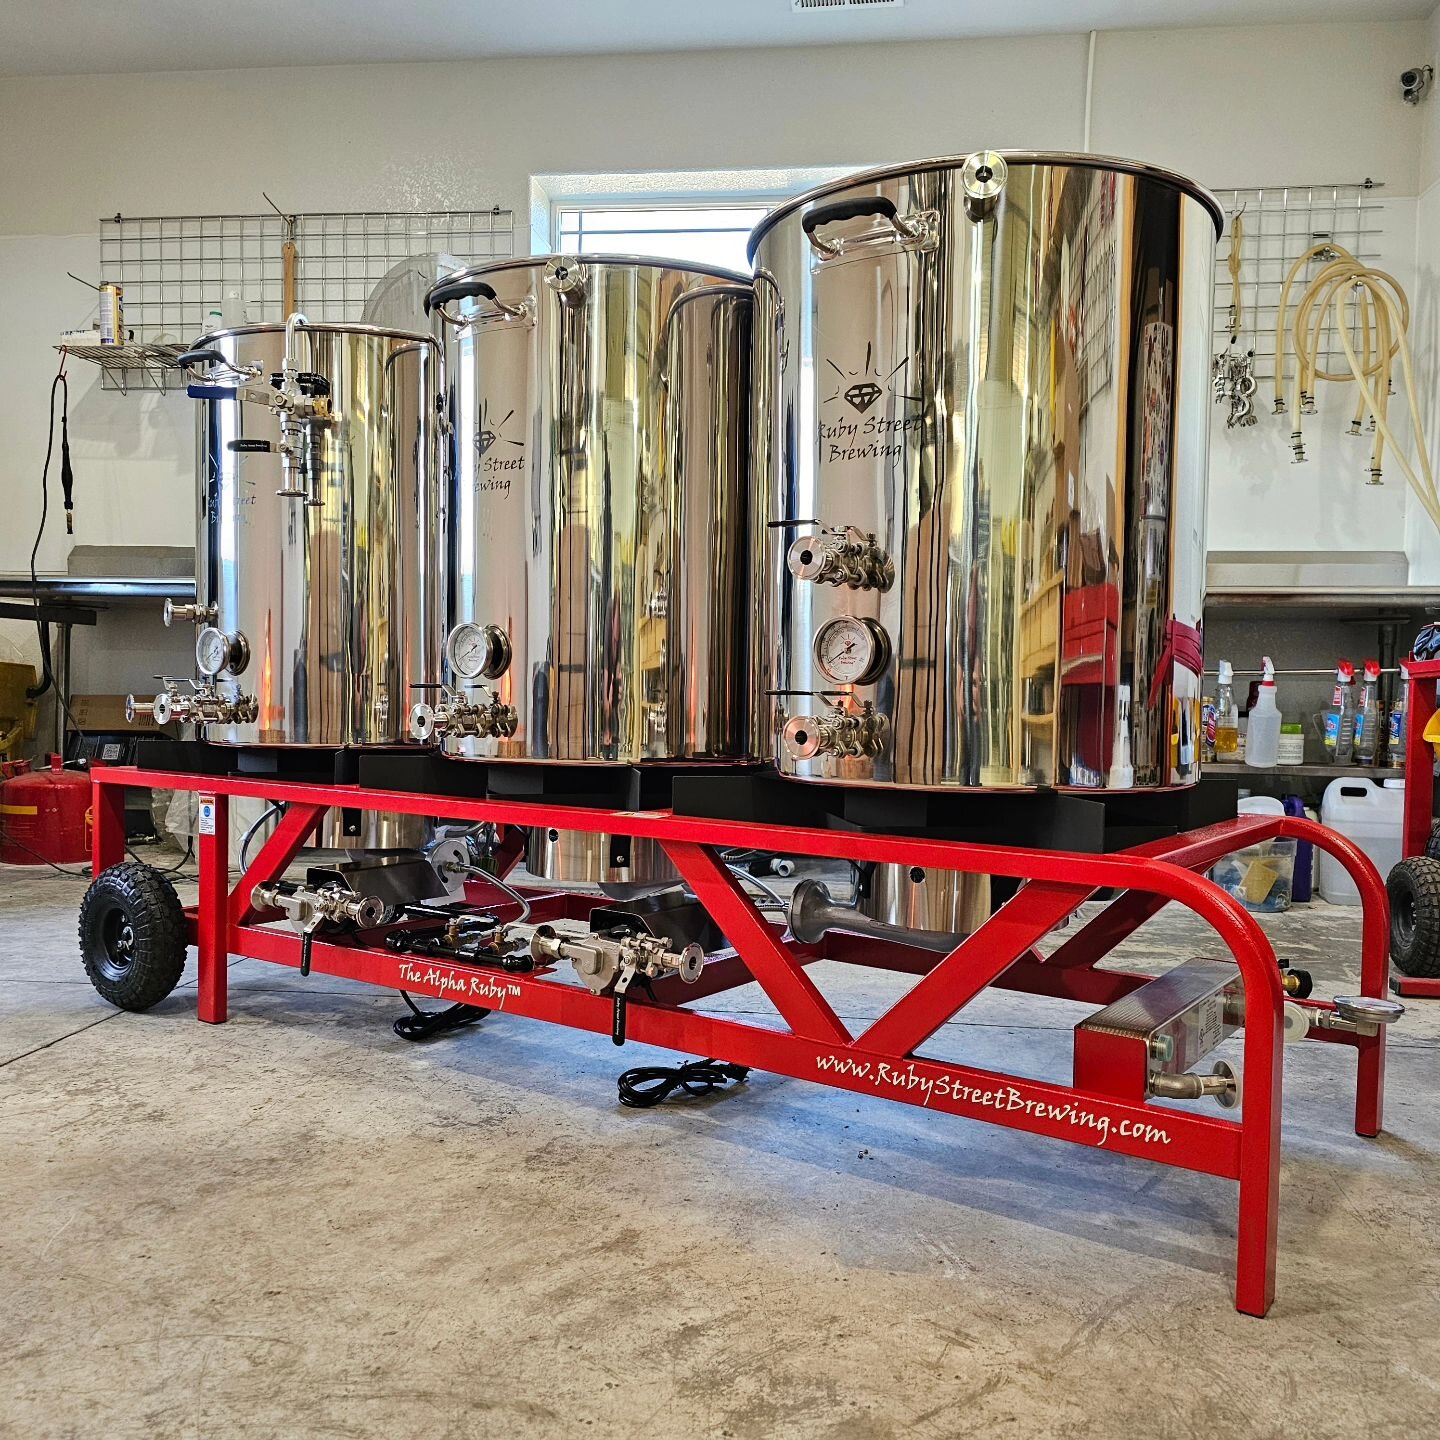 We owe the success of our company to the Alpha Ruby 1 BBL system.  In production for over 10 years now, many many breweries around the world have launched their businesses with the simple and reliable Alpha Ruby.  While our pro series systems are our